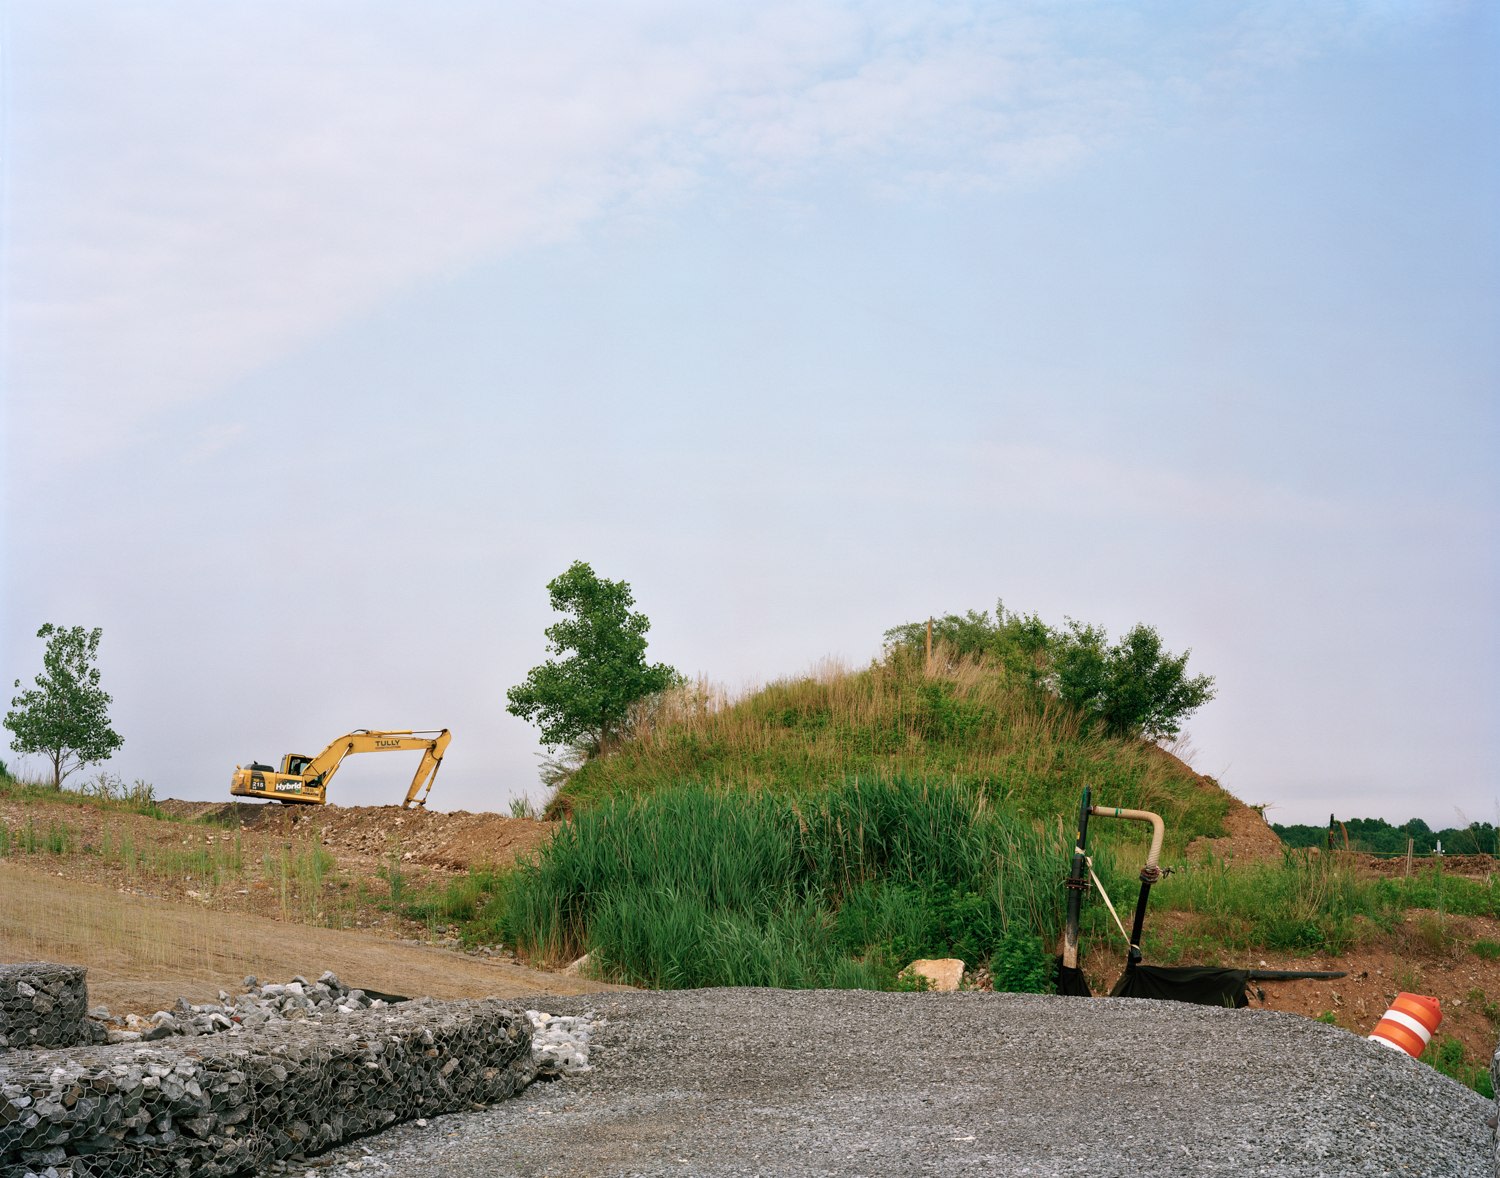 Old Landscape with New Interior Road and Gabion Wall, West Mound, 2019, Photograph of a mound of old landscaping, along a new road with big digger and other construction machinery in the distance, West Mound, Freshkills, NYC